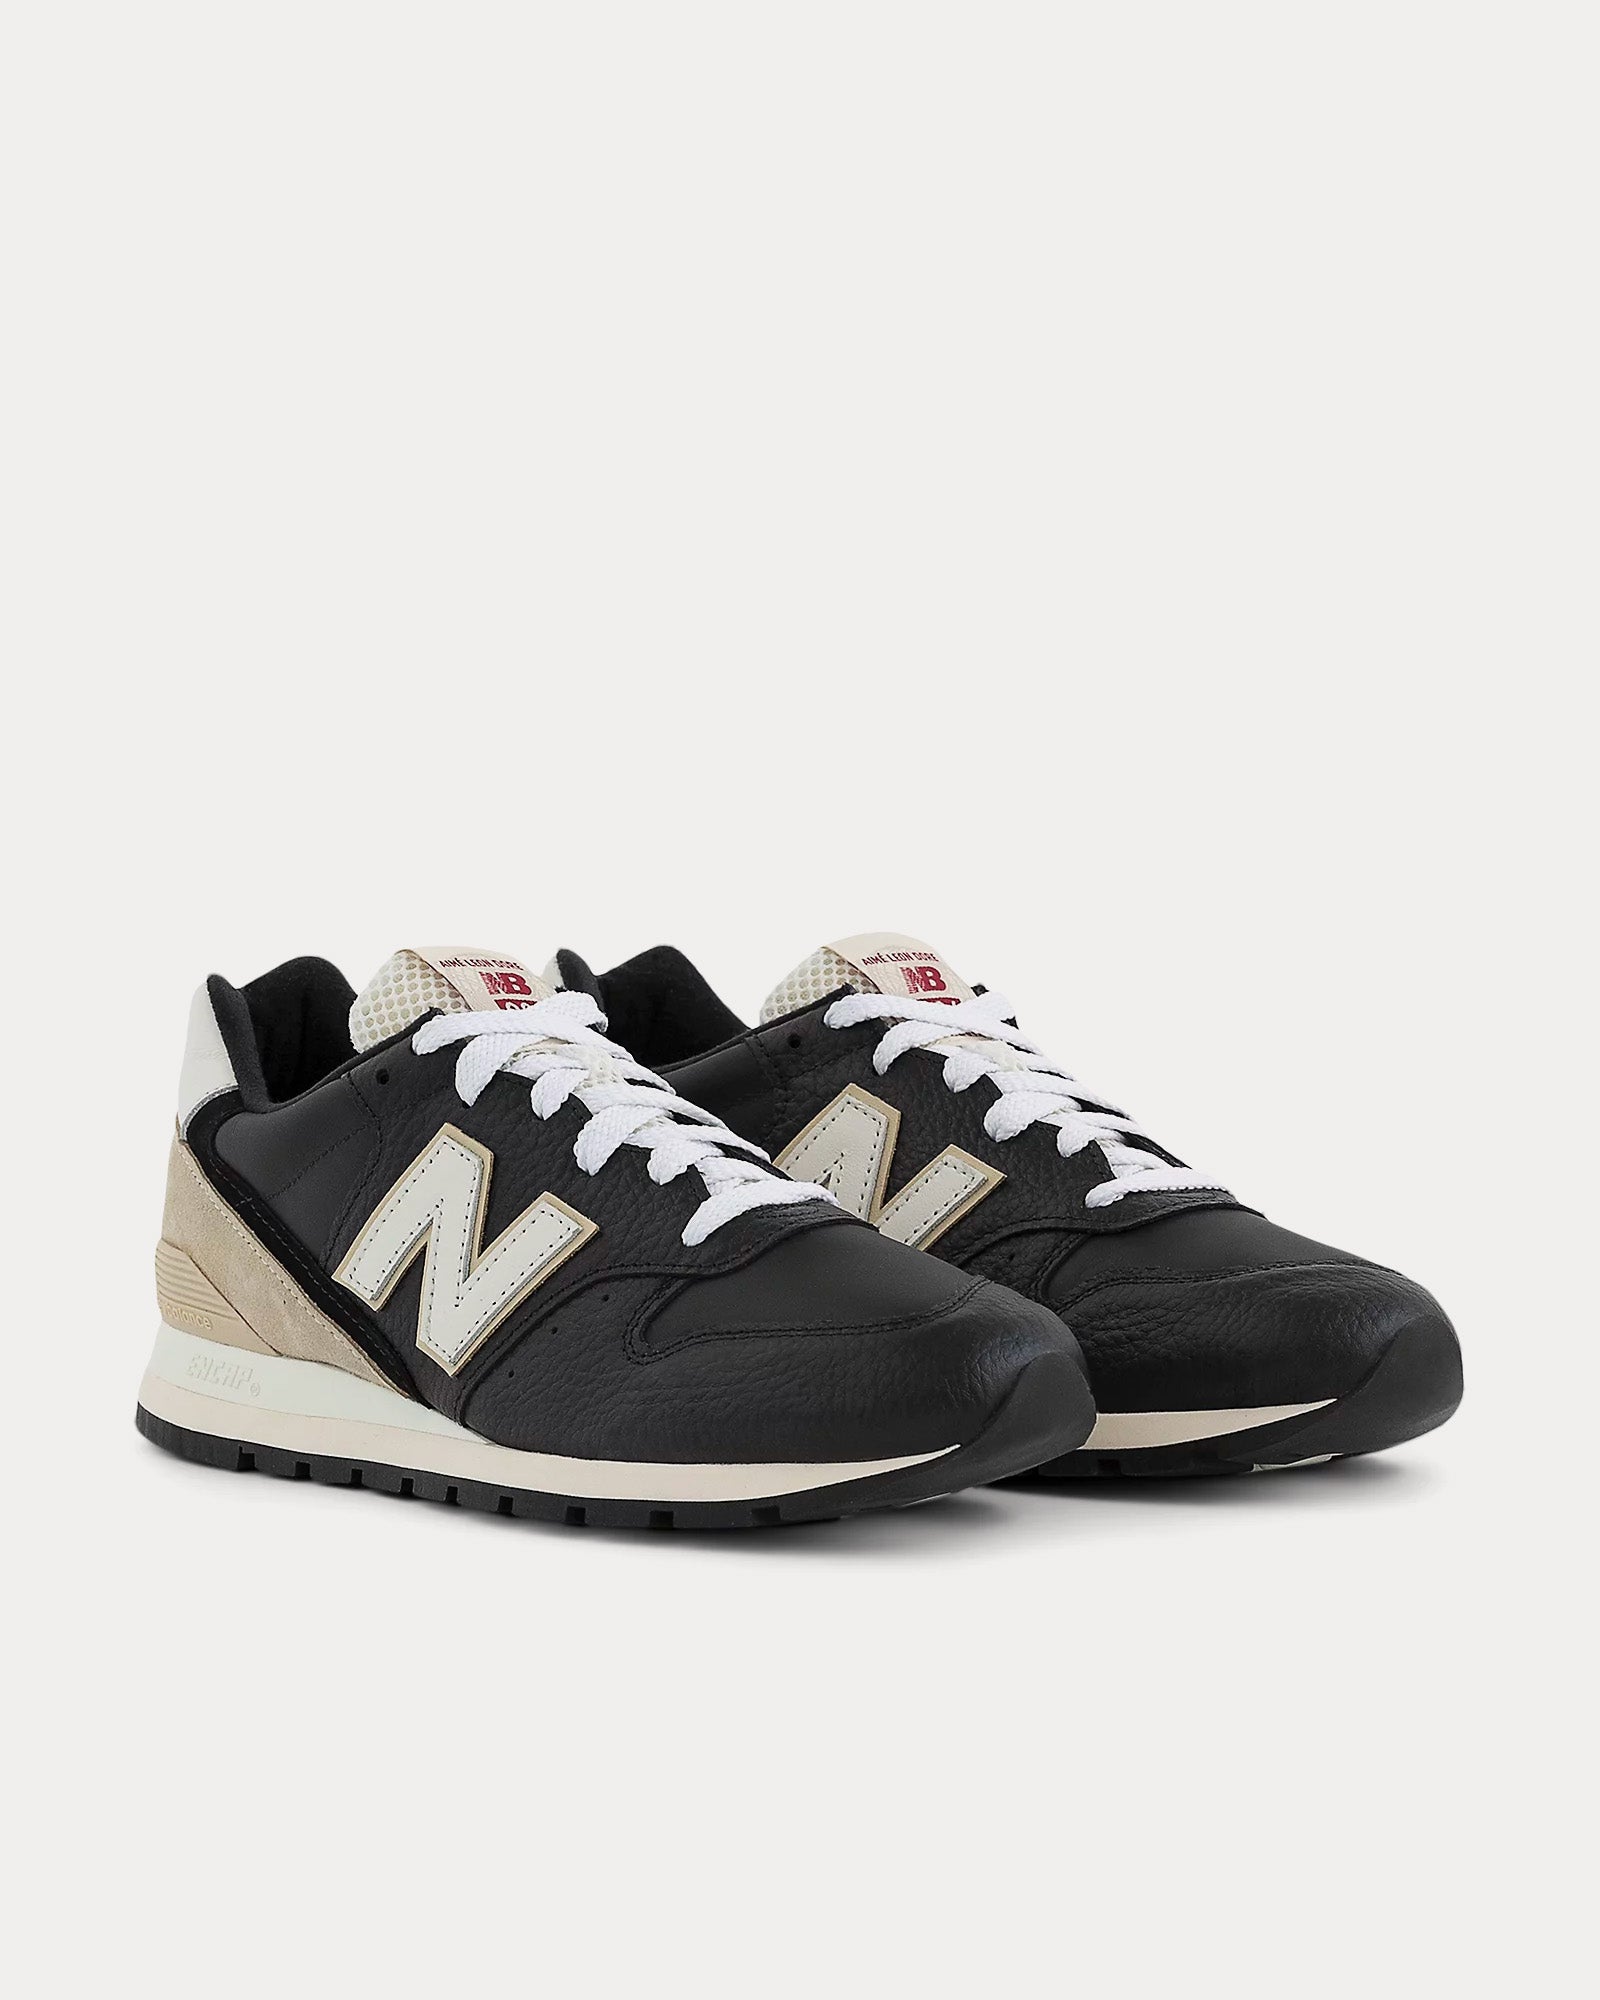 New Balance x Aime Leon Dore - Made in USA 996 Black / Sandstone / White Low Top Sneakers